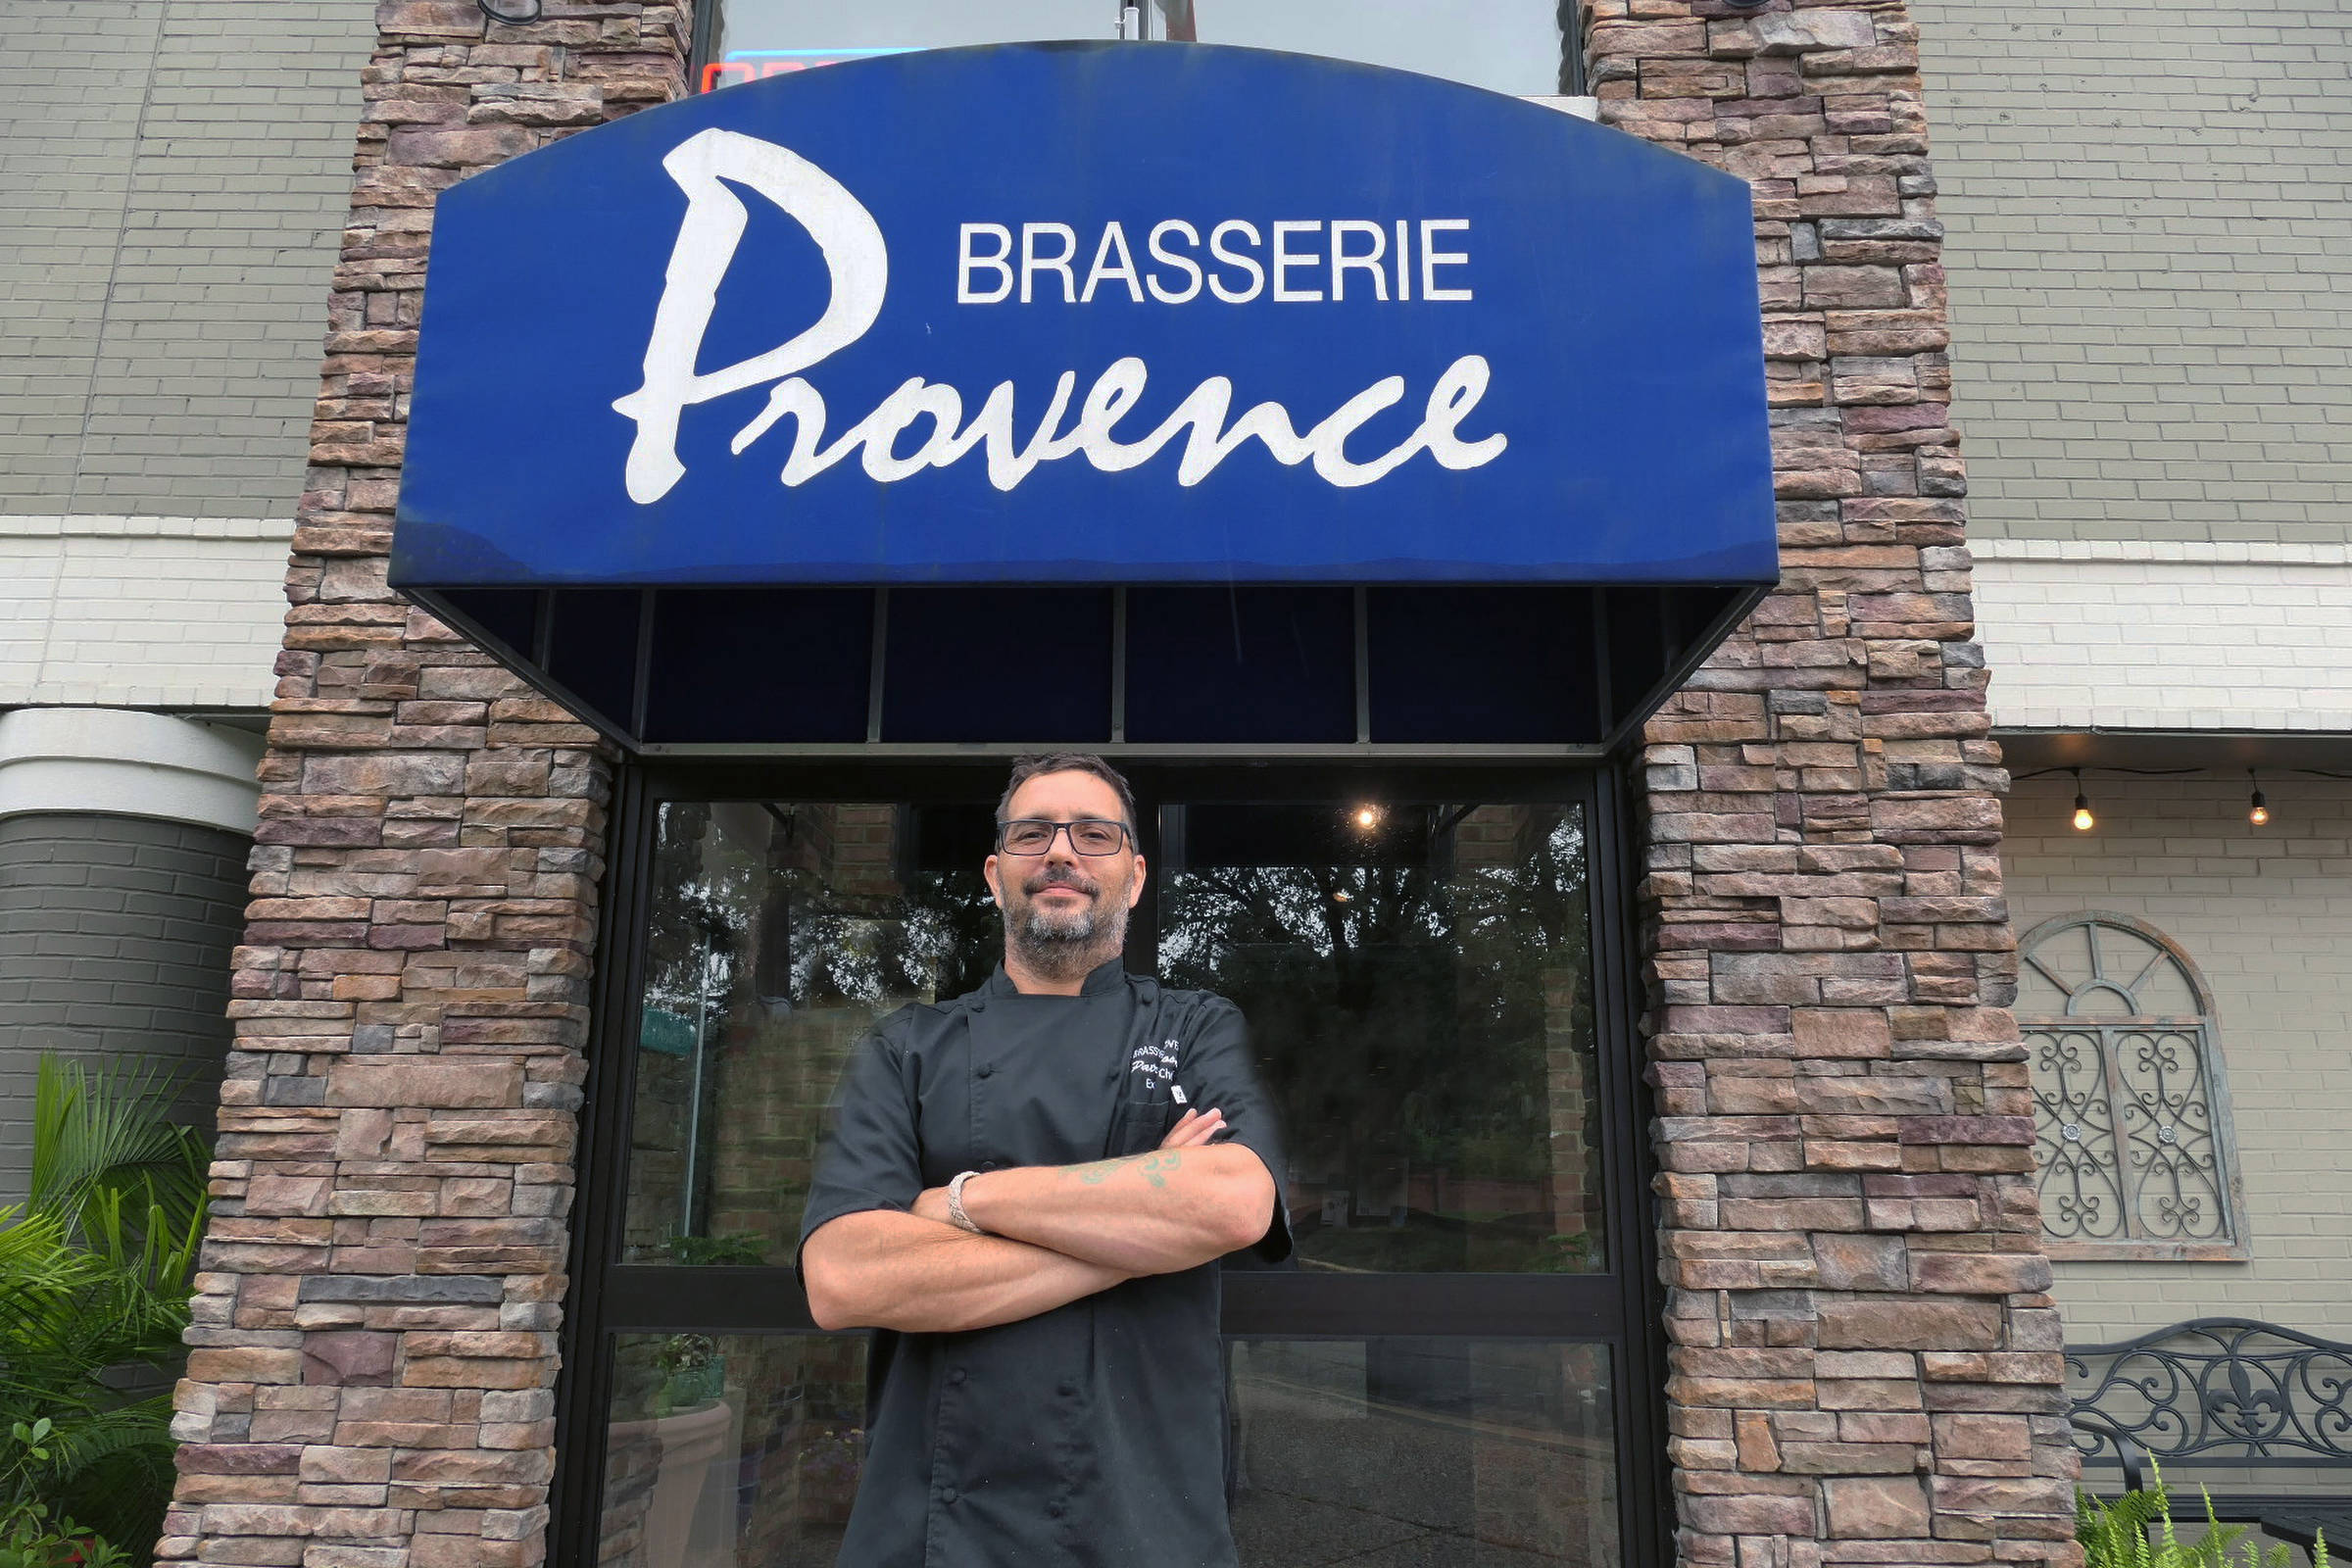 Chef in a Box (August 17 or 18): Brasserie Provence, with Chef Patrick Gosden